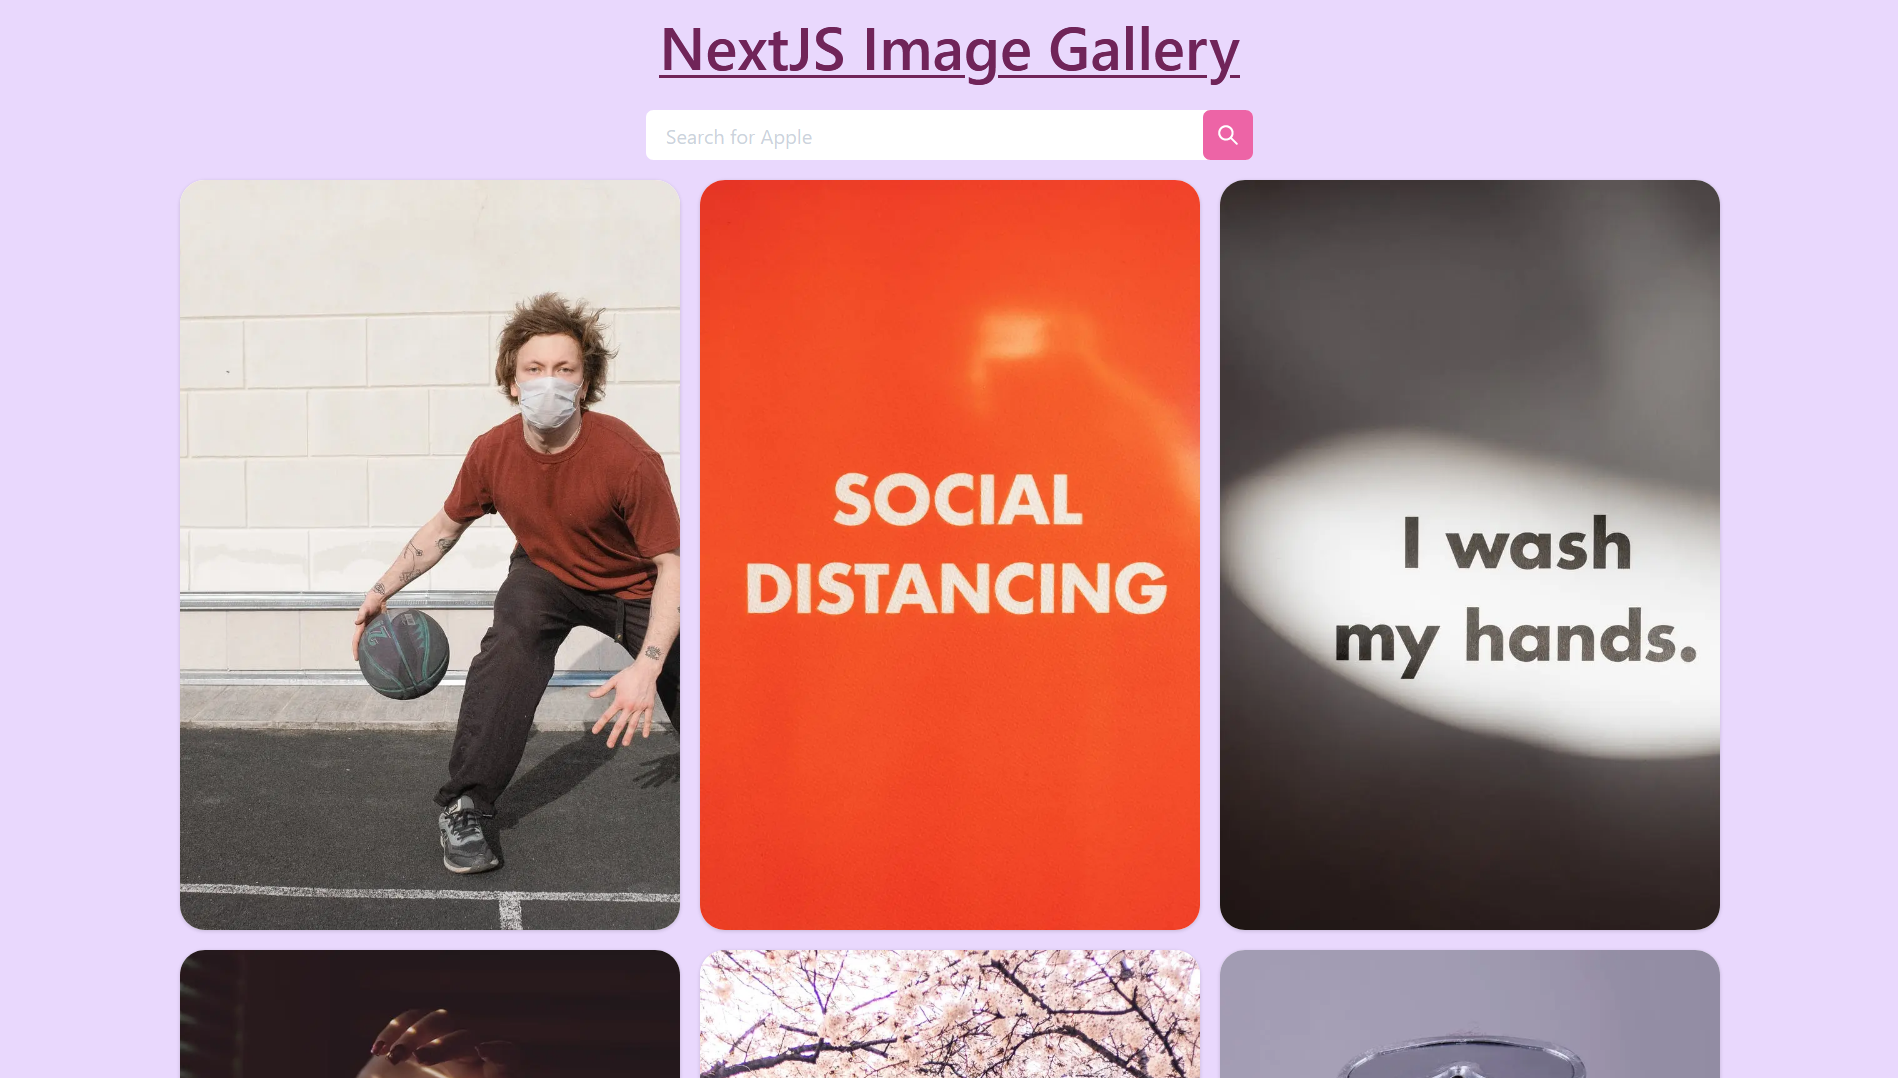 How to Build an Image Gallery with NextJS using the Pexels API and Chakra UI